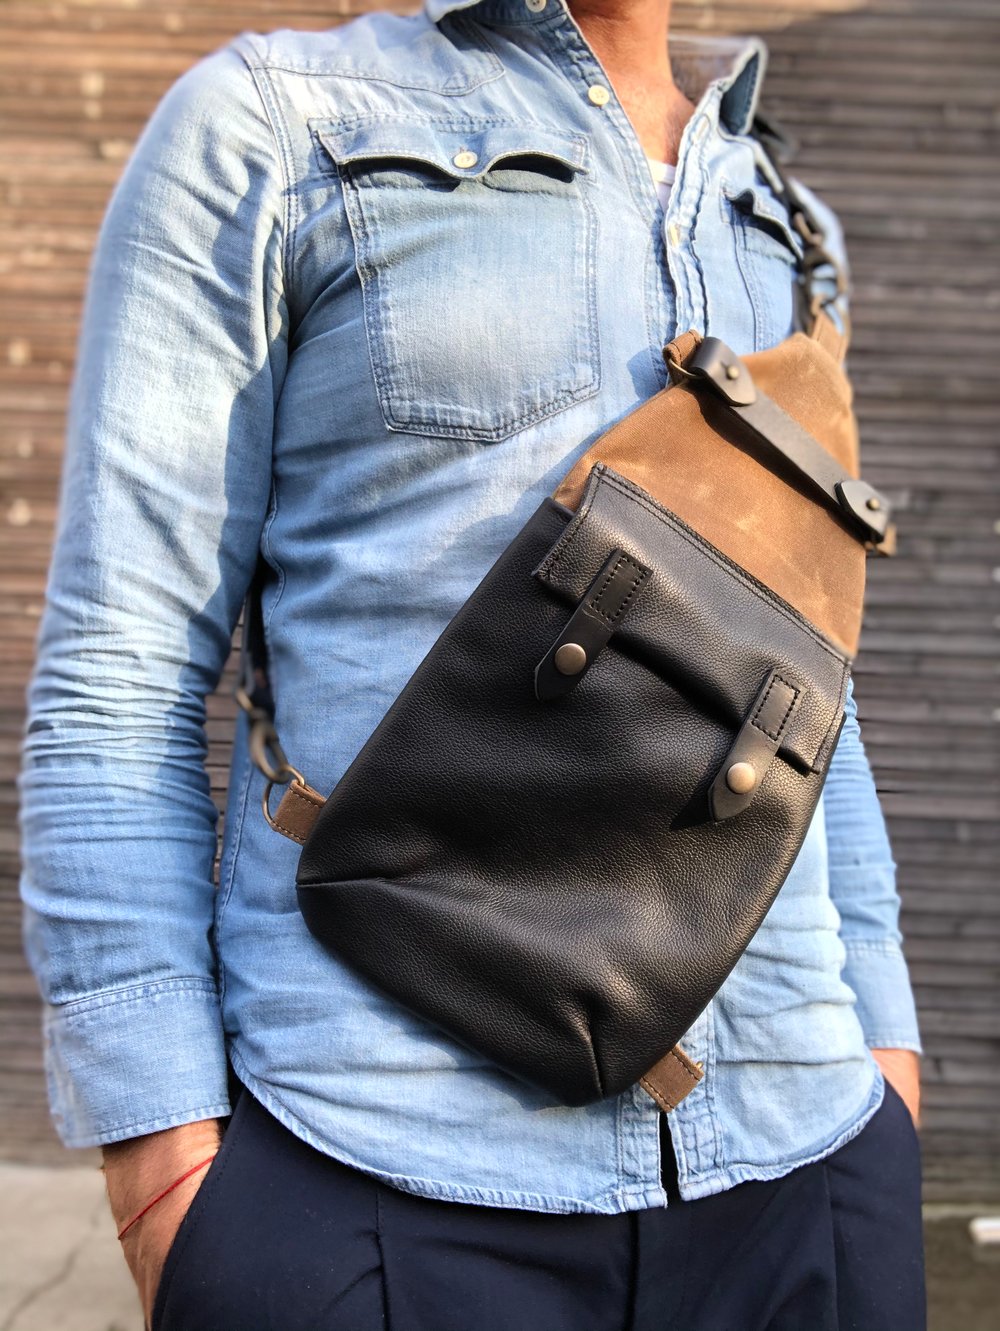 Spice waxed canvas sling bag / fanny pack / chest bag / day bag